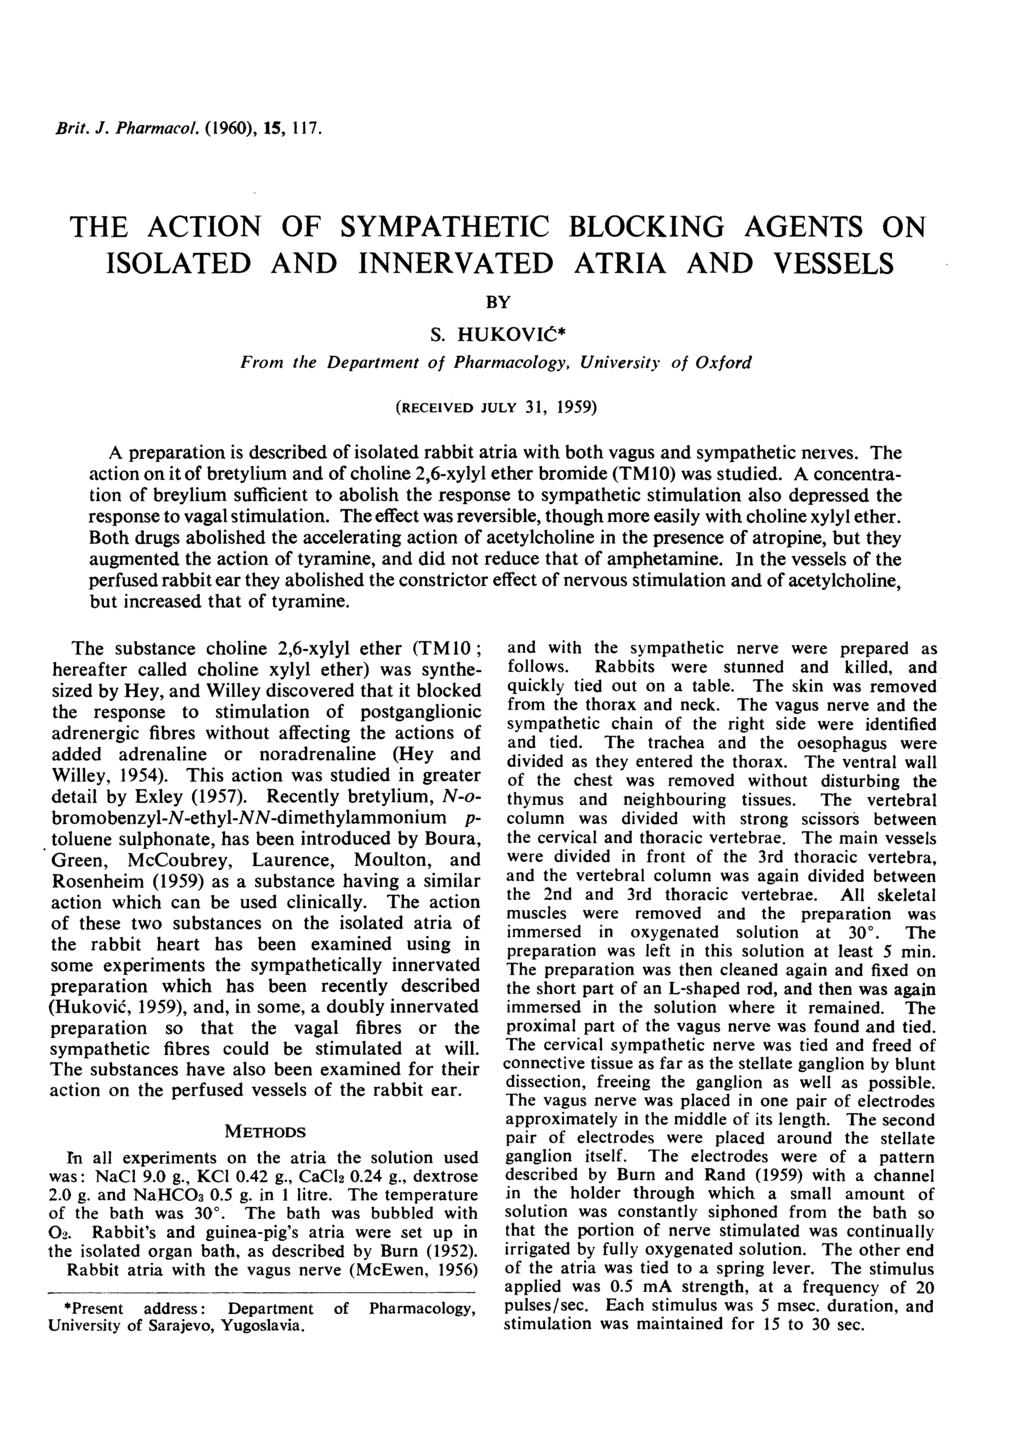 Brit. J. Pharmacol. (1960), 15, 117. THE ACTION OF SYMPATHETIC BLOCKING AGENTS ON ISOLATED AND INNERVATED ATRIA AND VESSELS BY S.